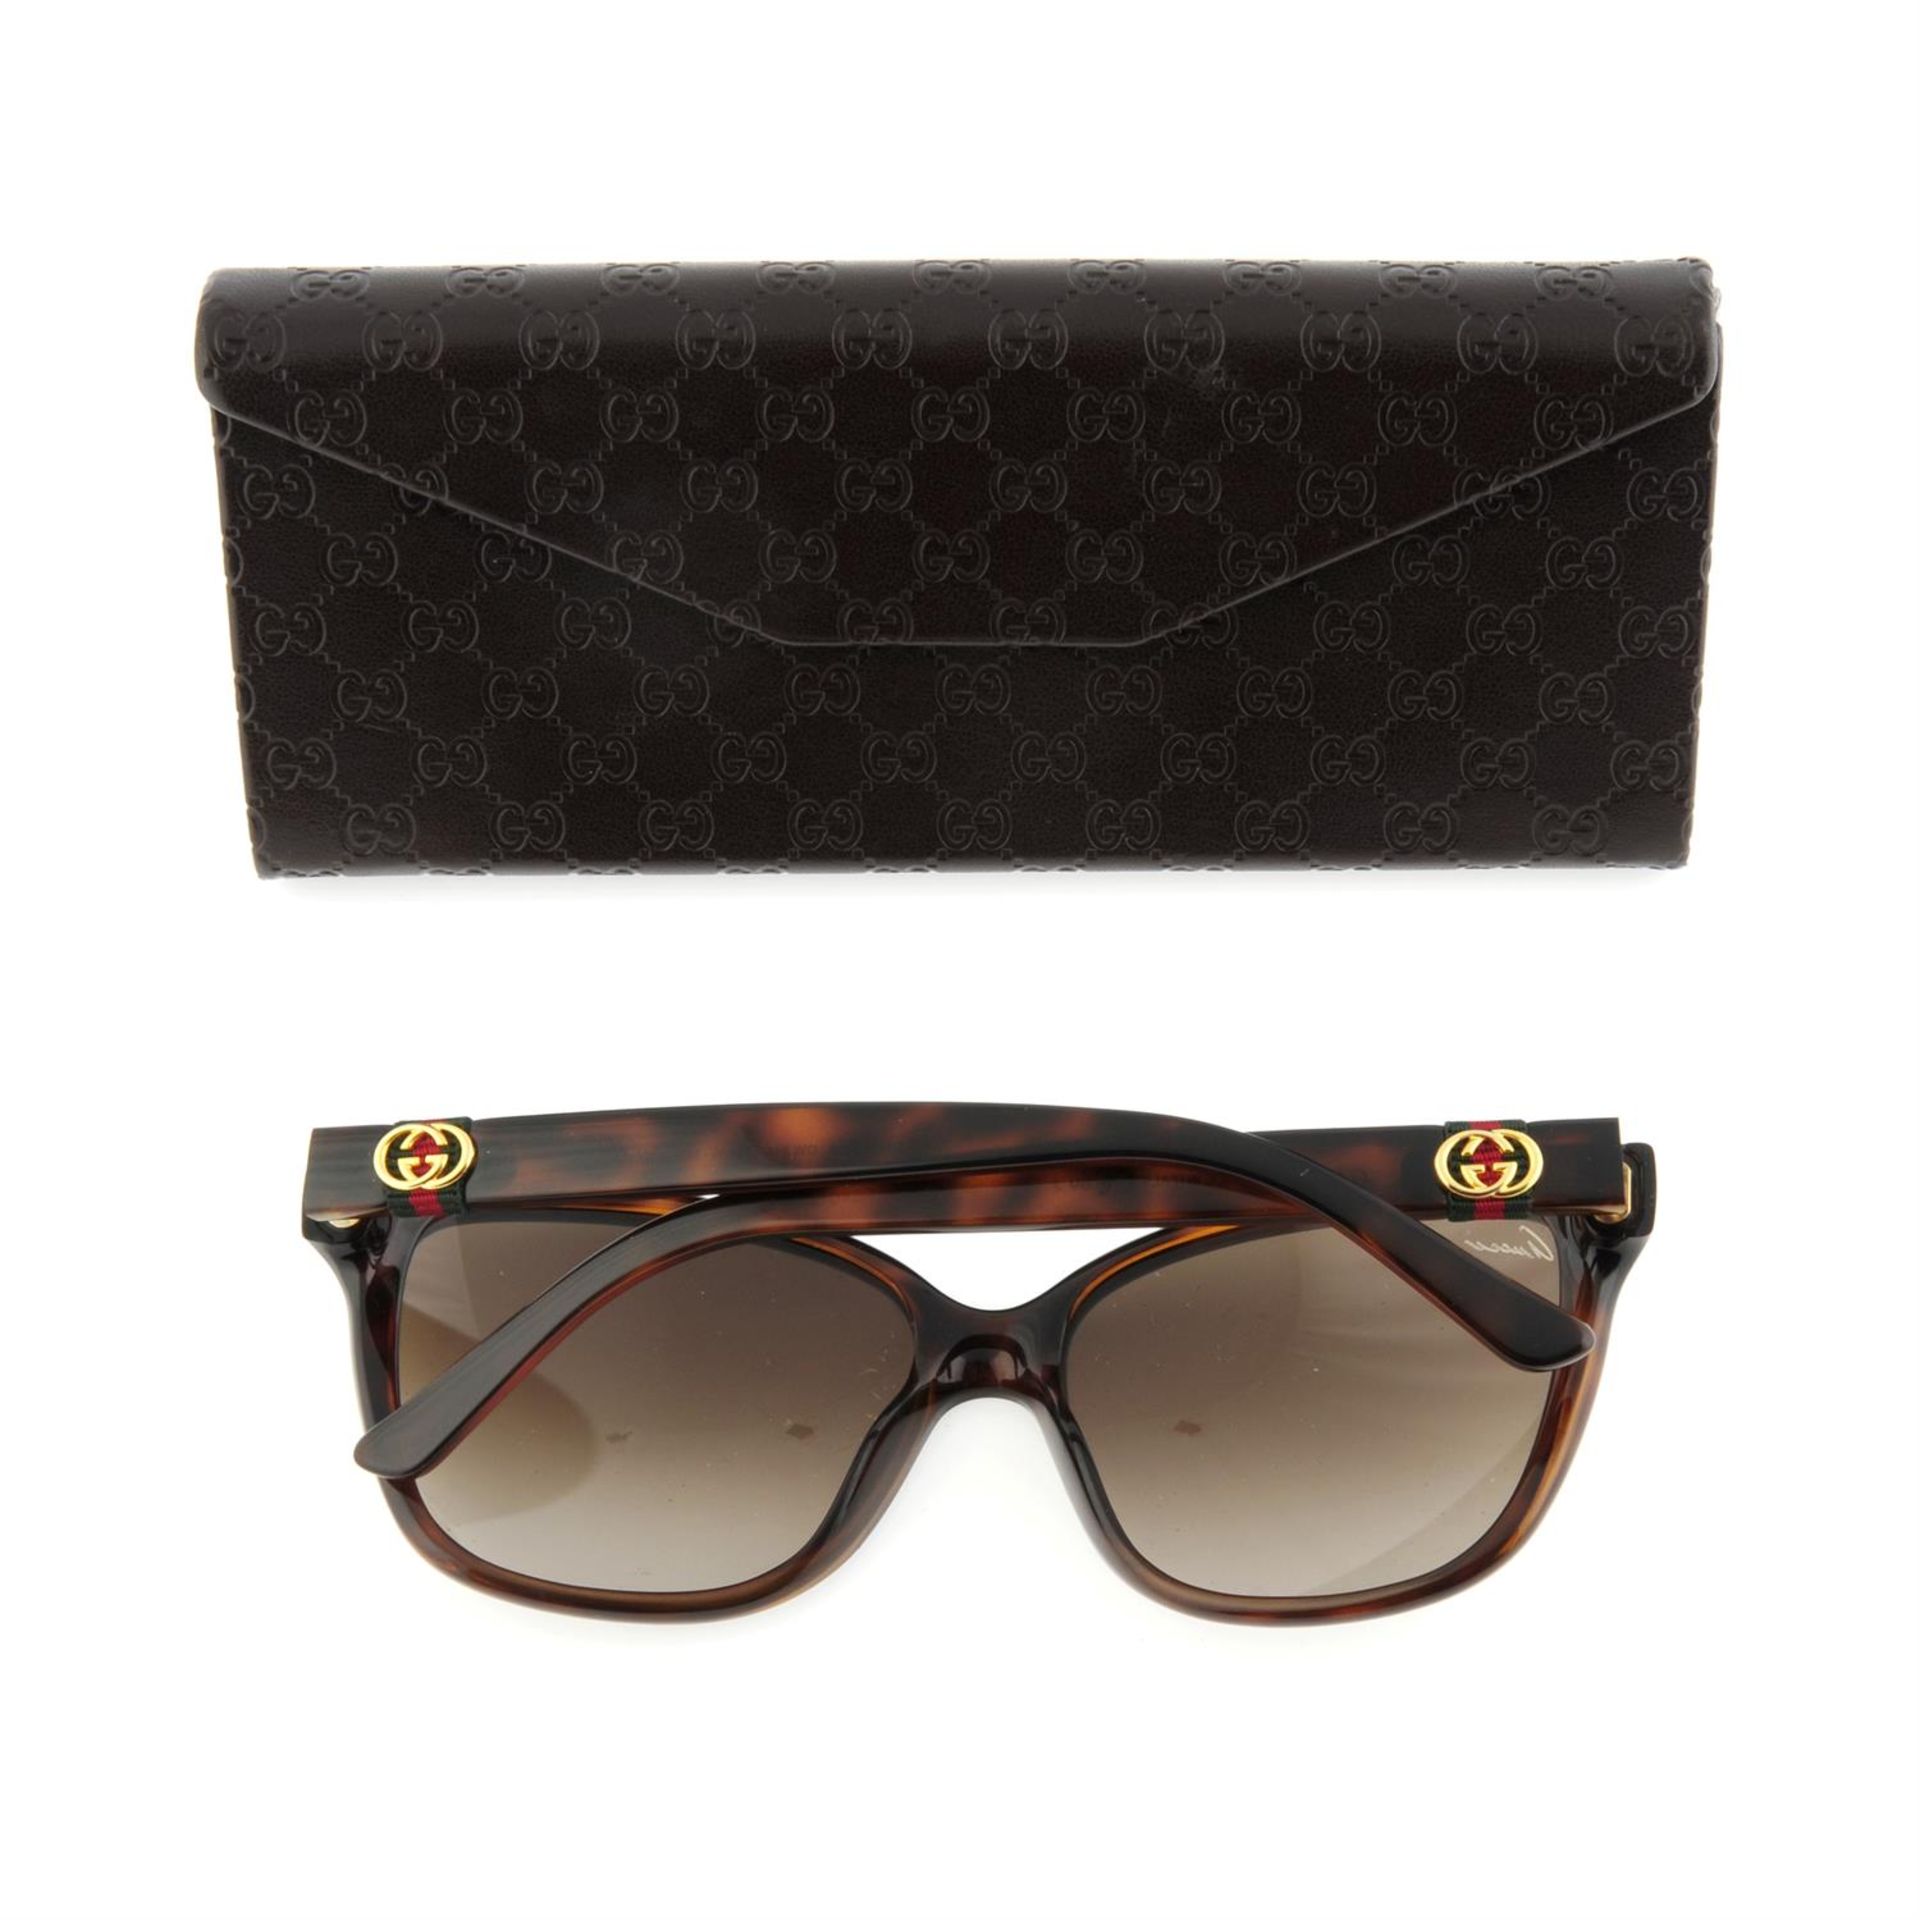 GUCCI - a pair of sunglasses. - Image 2 of 2